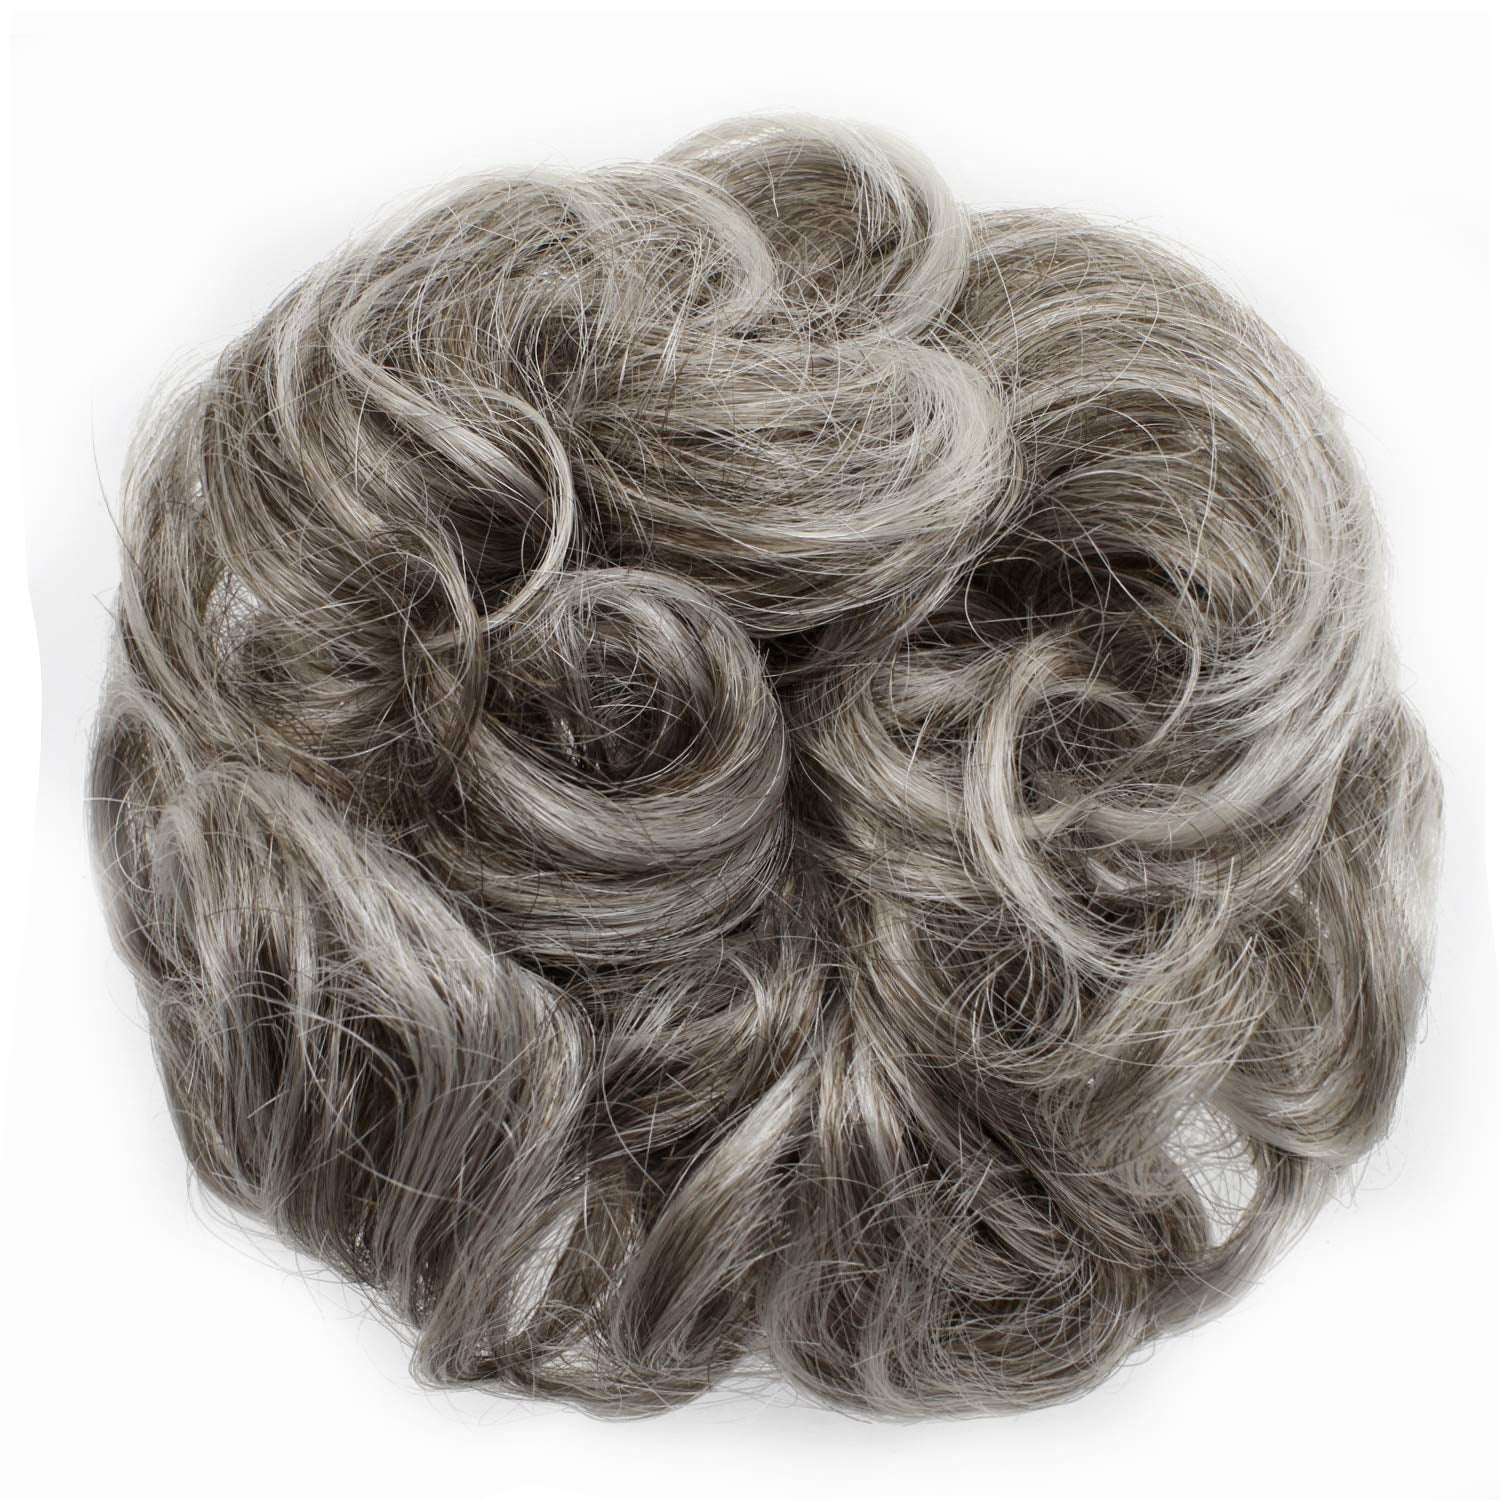 Buy Ladies Synthetic Wavy Curly or Messy Dish Hair Bun Extension Hairpiece  Scrunchie Chignon Tray Ponytail 48T Online at Lowest Price in Nigeria.  335754246